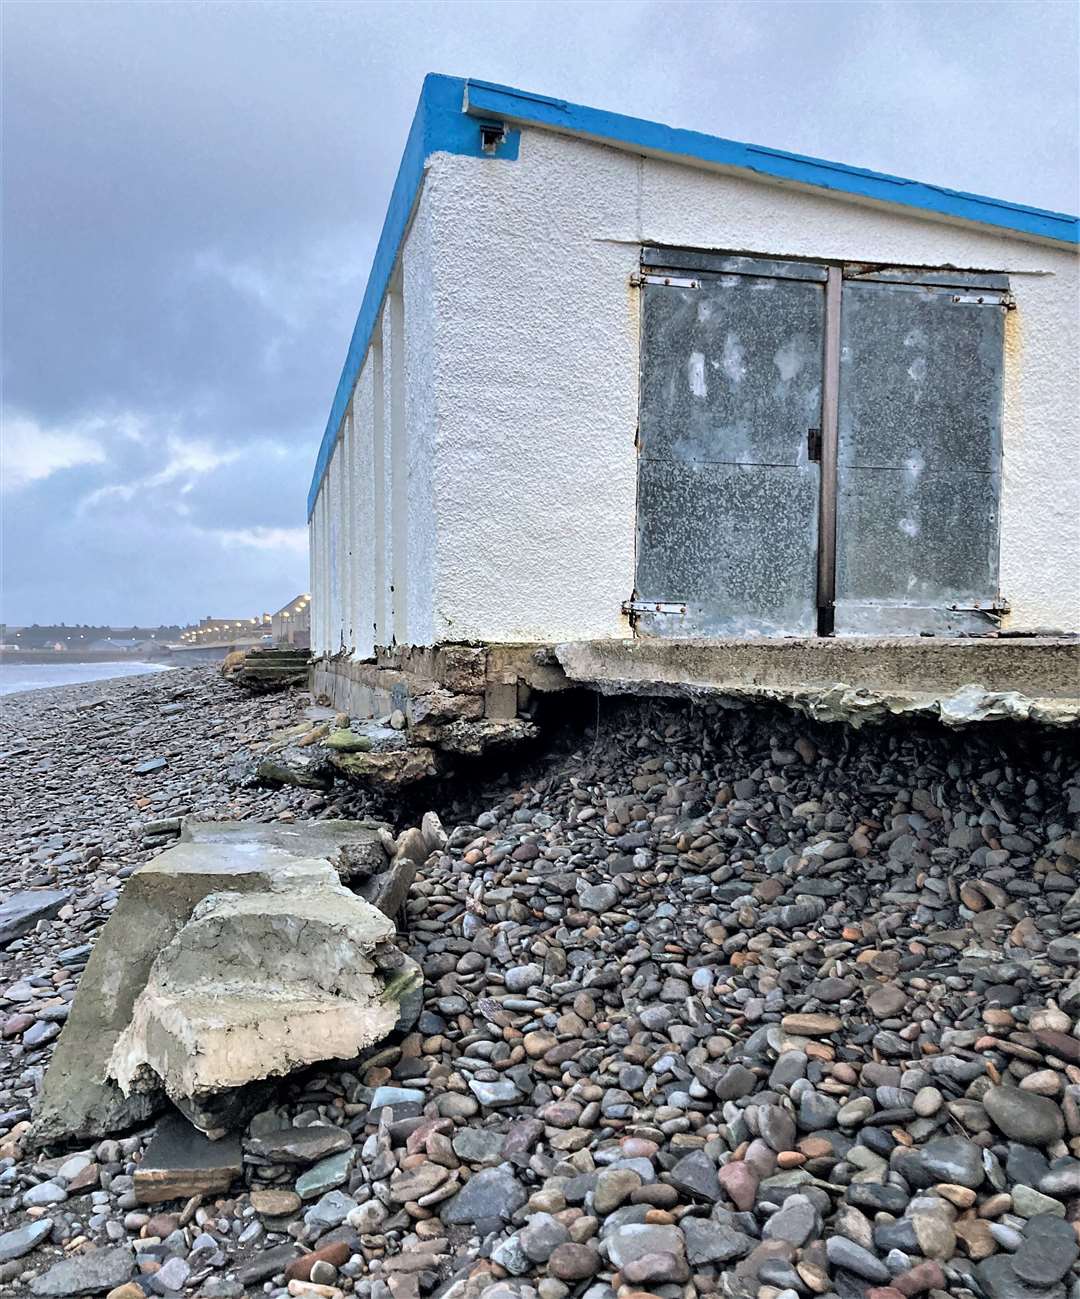 The building is being undermined by erosion. Picture: Matthew Reiss